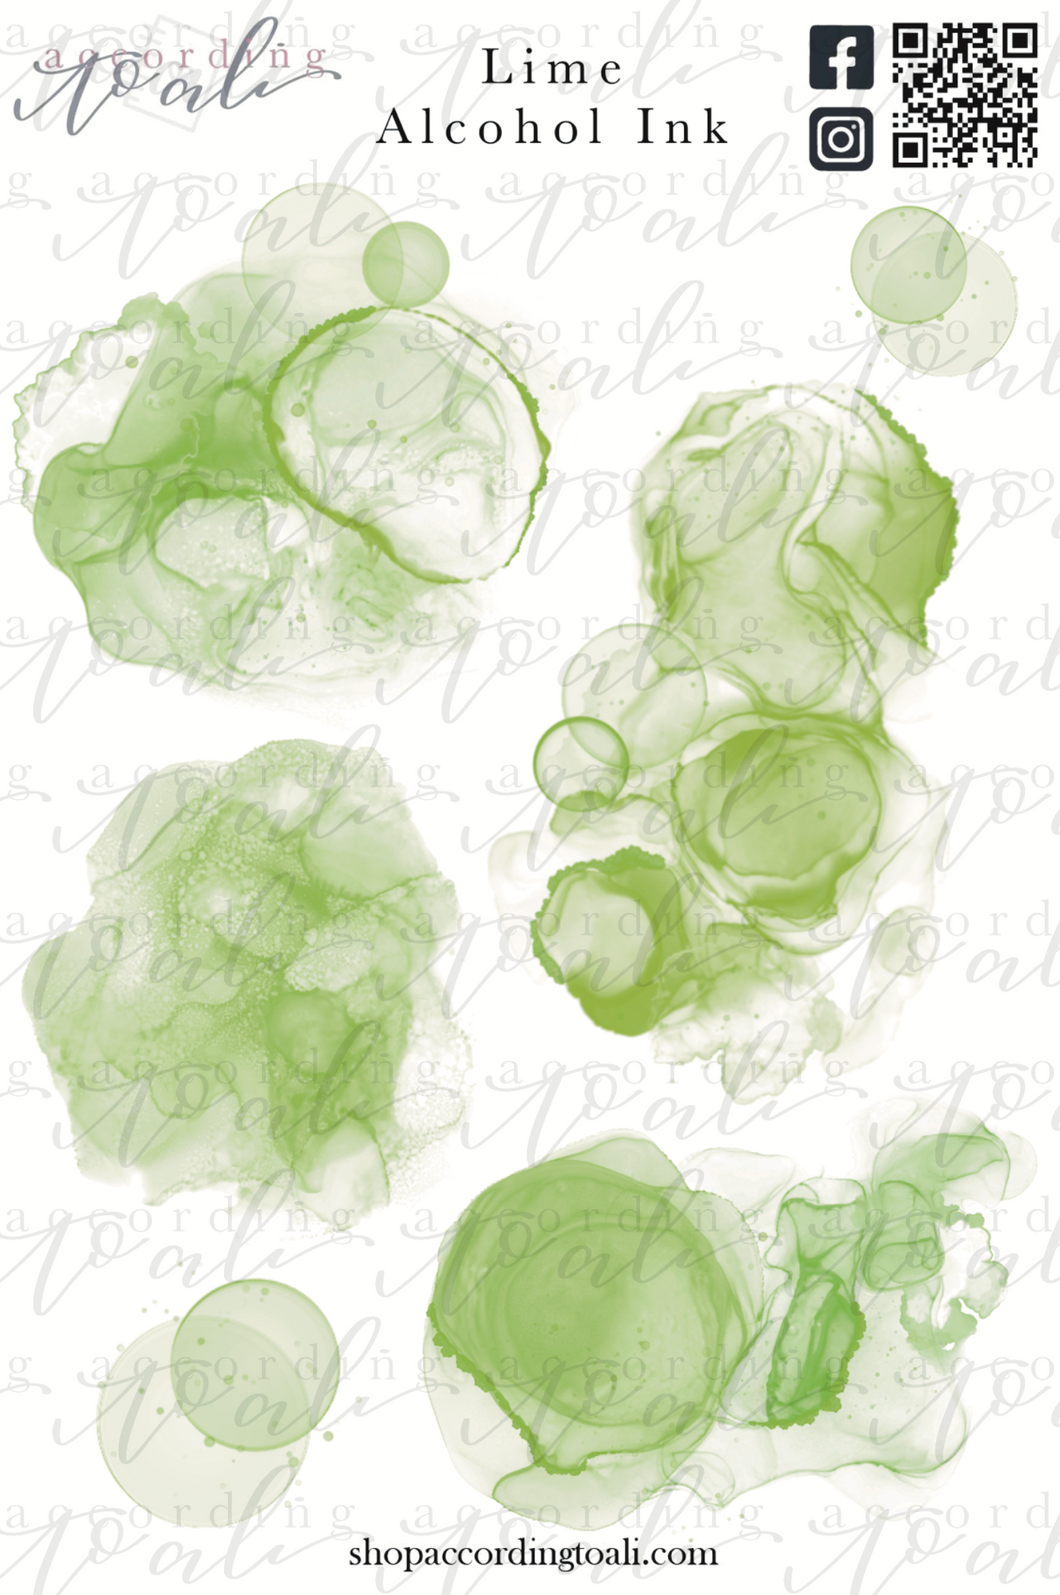 Lime Alcohol Ink Sticker Sheet